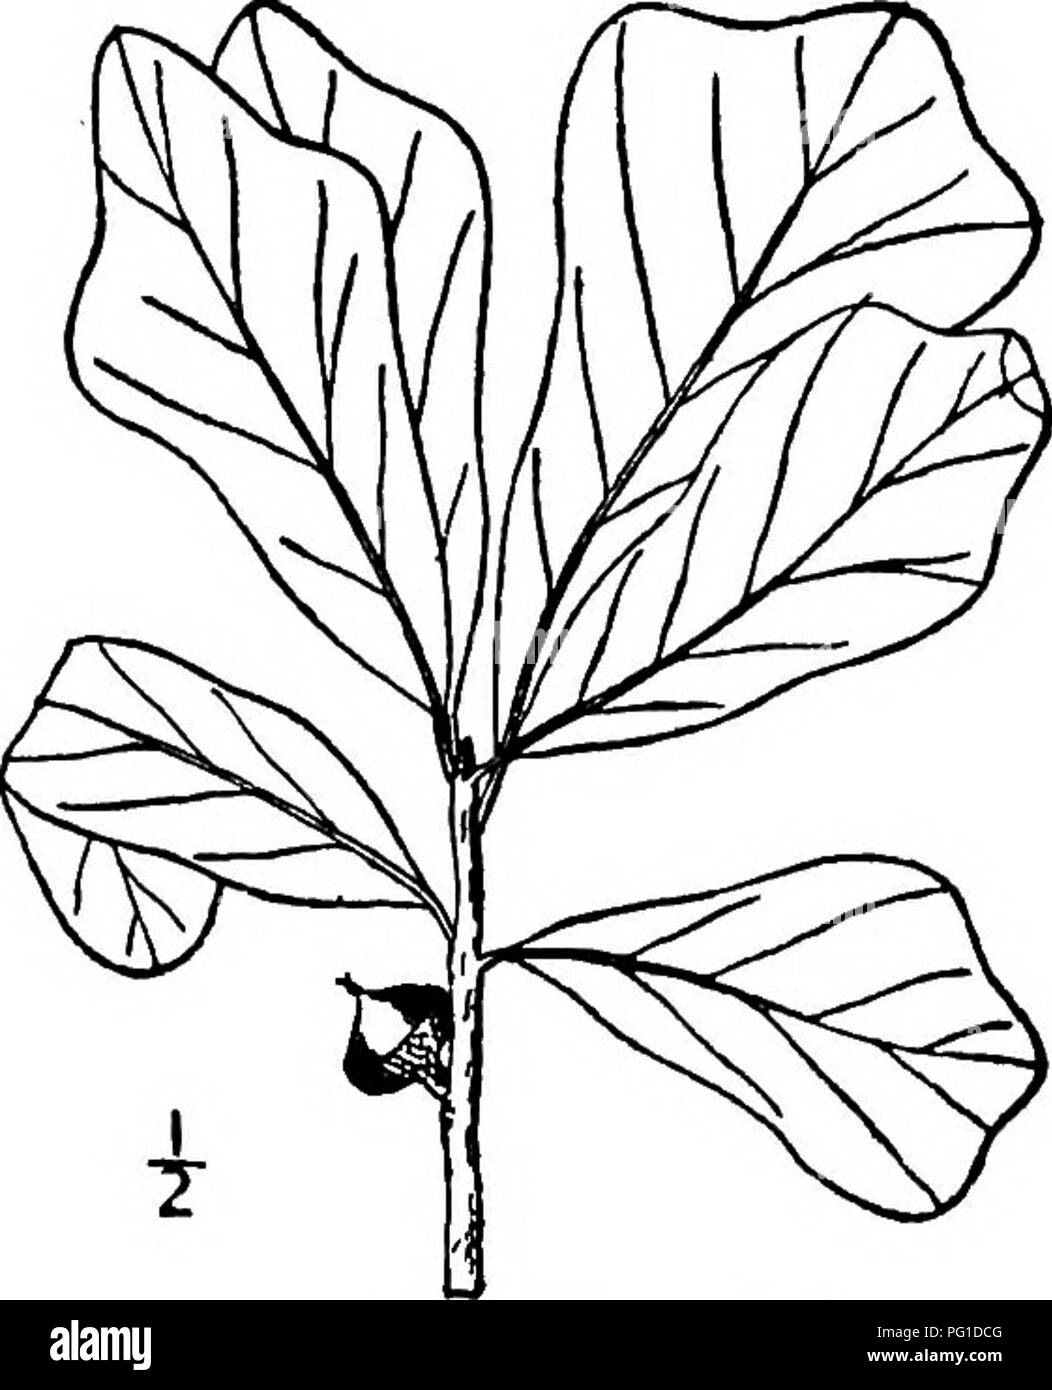 . North American trees : being descriptions and illustrations of the trees growing independently of cultivation in North America, north of Mexico and the West Indies . Trees. Water Oak 299 lowish before falling; their leaf-stalks are stout, grooved, 5 to 10 mm. long, smooth or hairy, yellowish. The flowers appear from March to May, according to lati- tude, when the leaves are half unfolded, the staminate in clustered hairy catkins 5 to 10 cm. long, their calyx reddish and hairy, the 4 or 5 lobes ovate and rounded; stamens usually 4, slightly exserted; anthers oblong, sharp-pointed, red. The pi Stock Photo